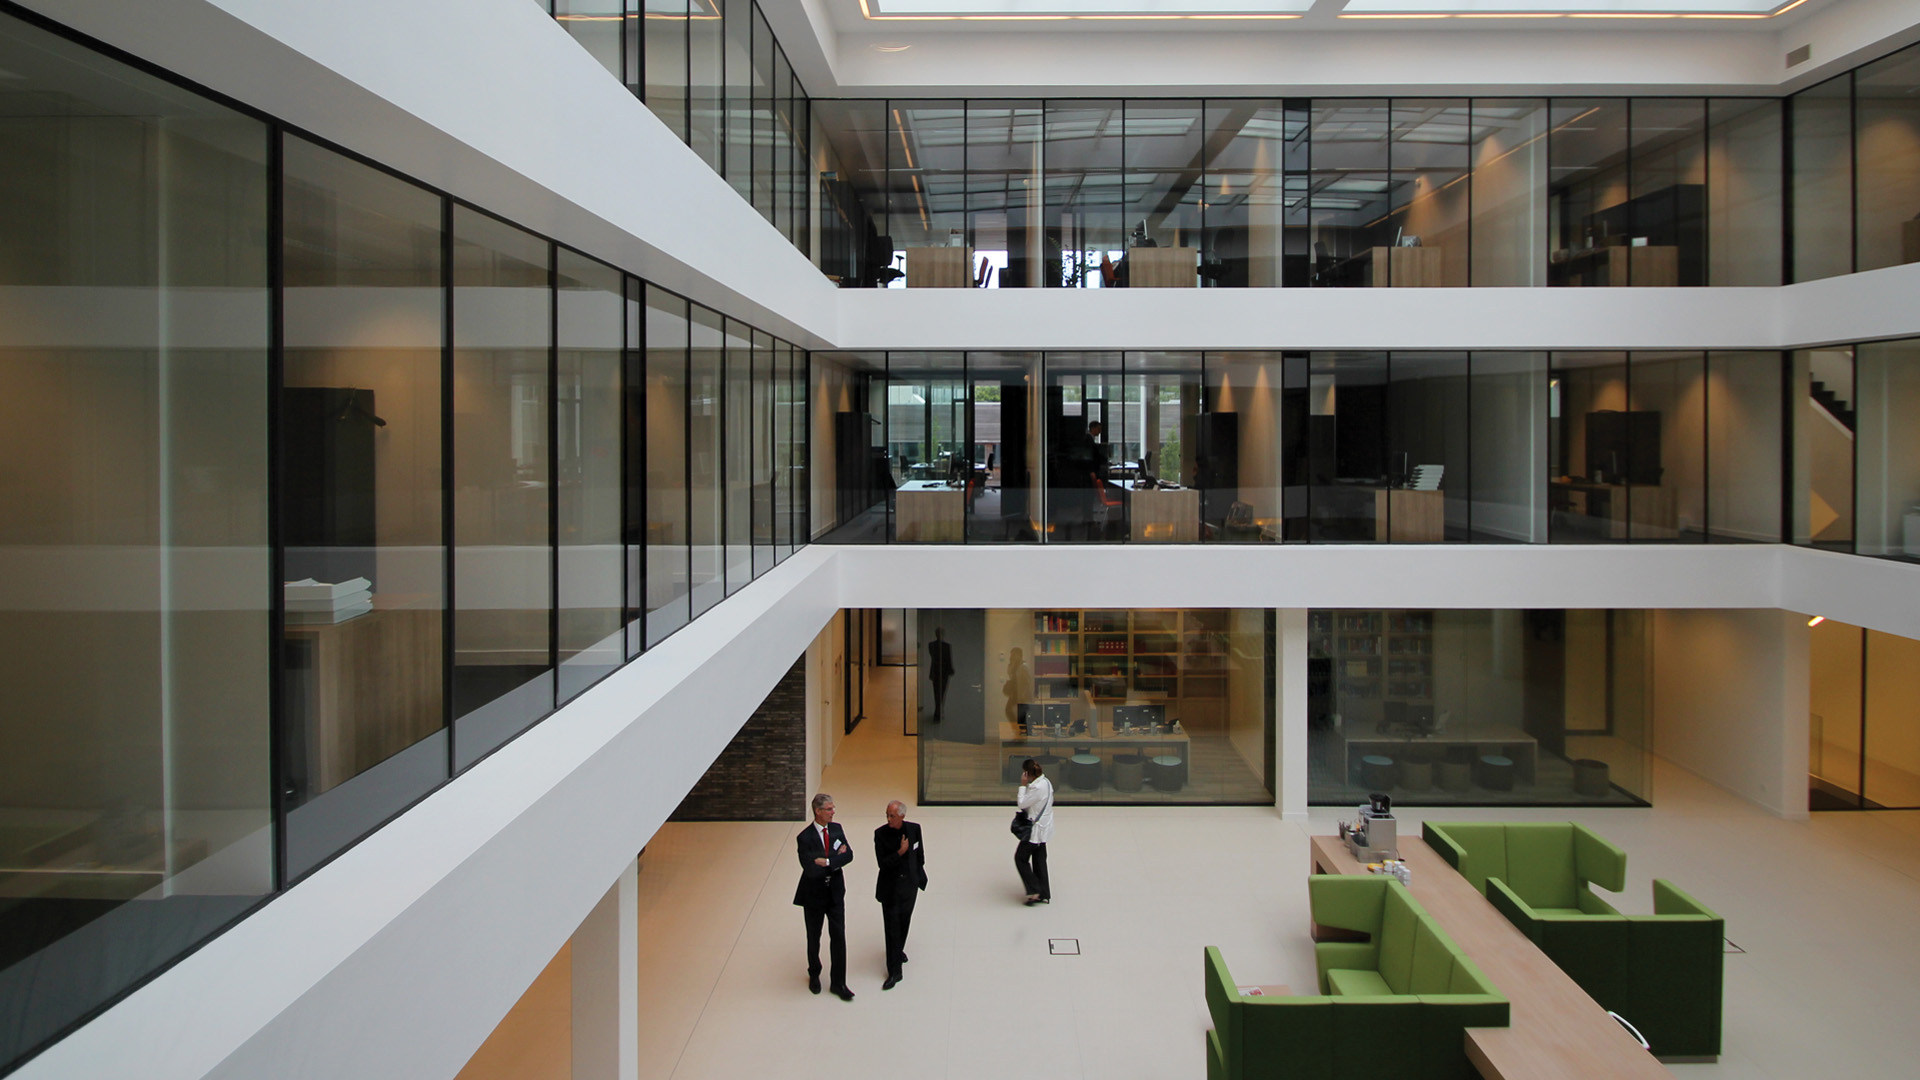 Steel glazed windows in the accountancy office of WVDB in the Netherlands